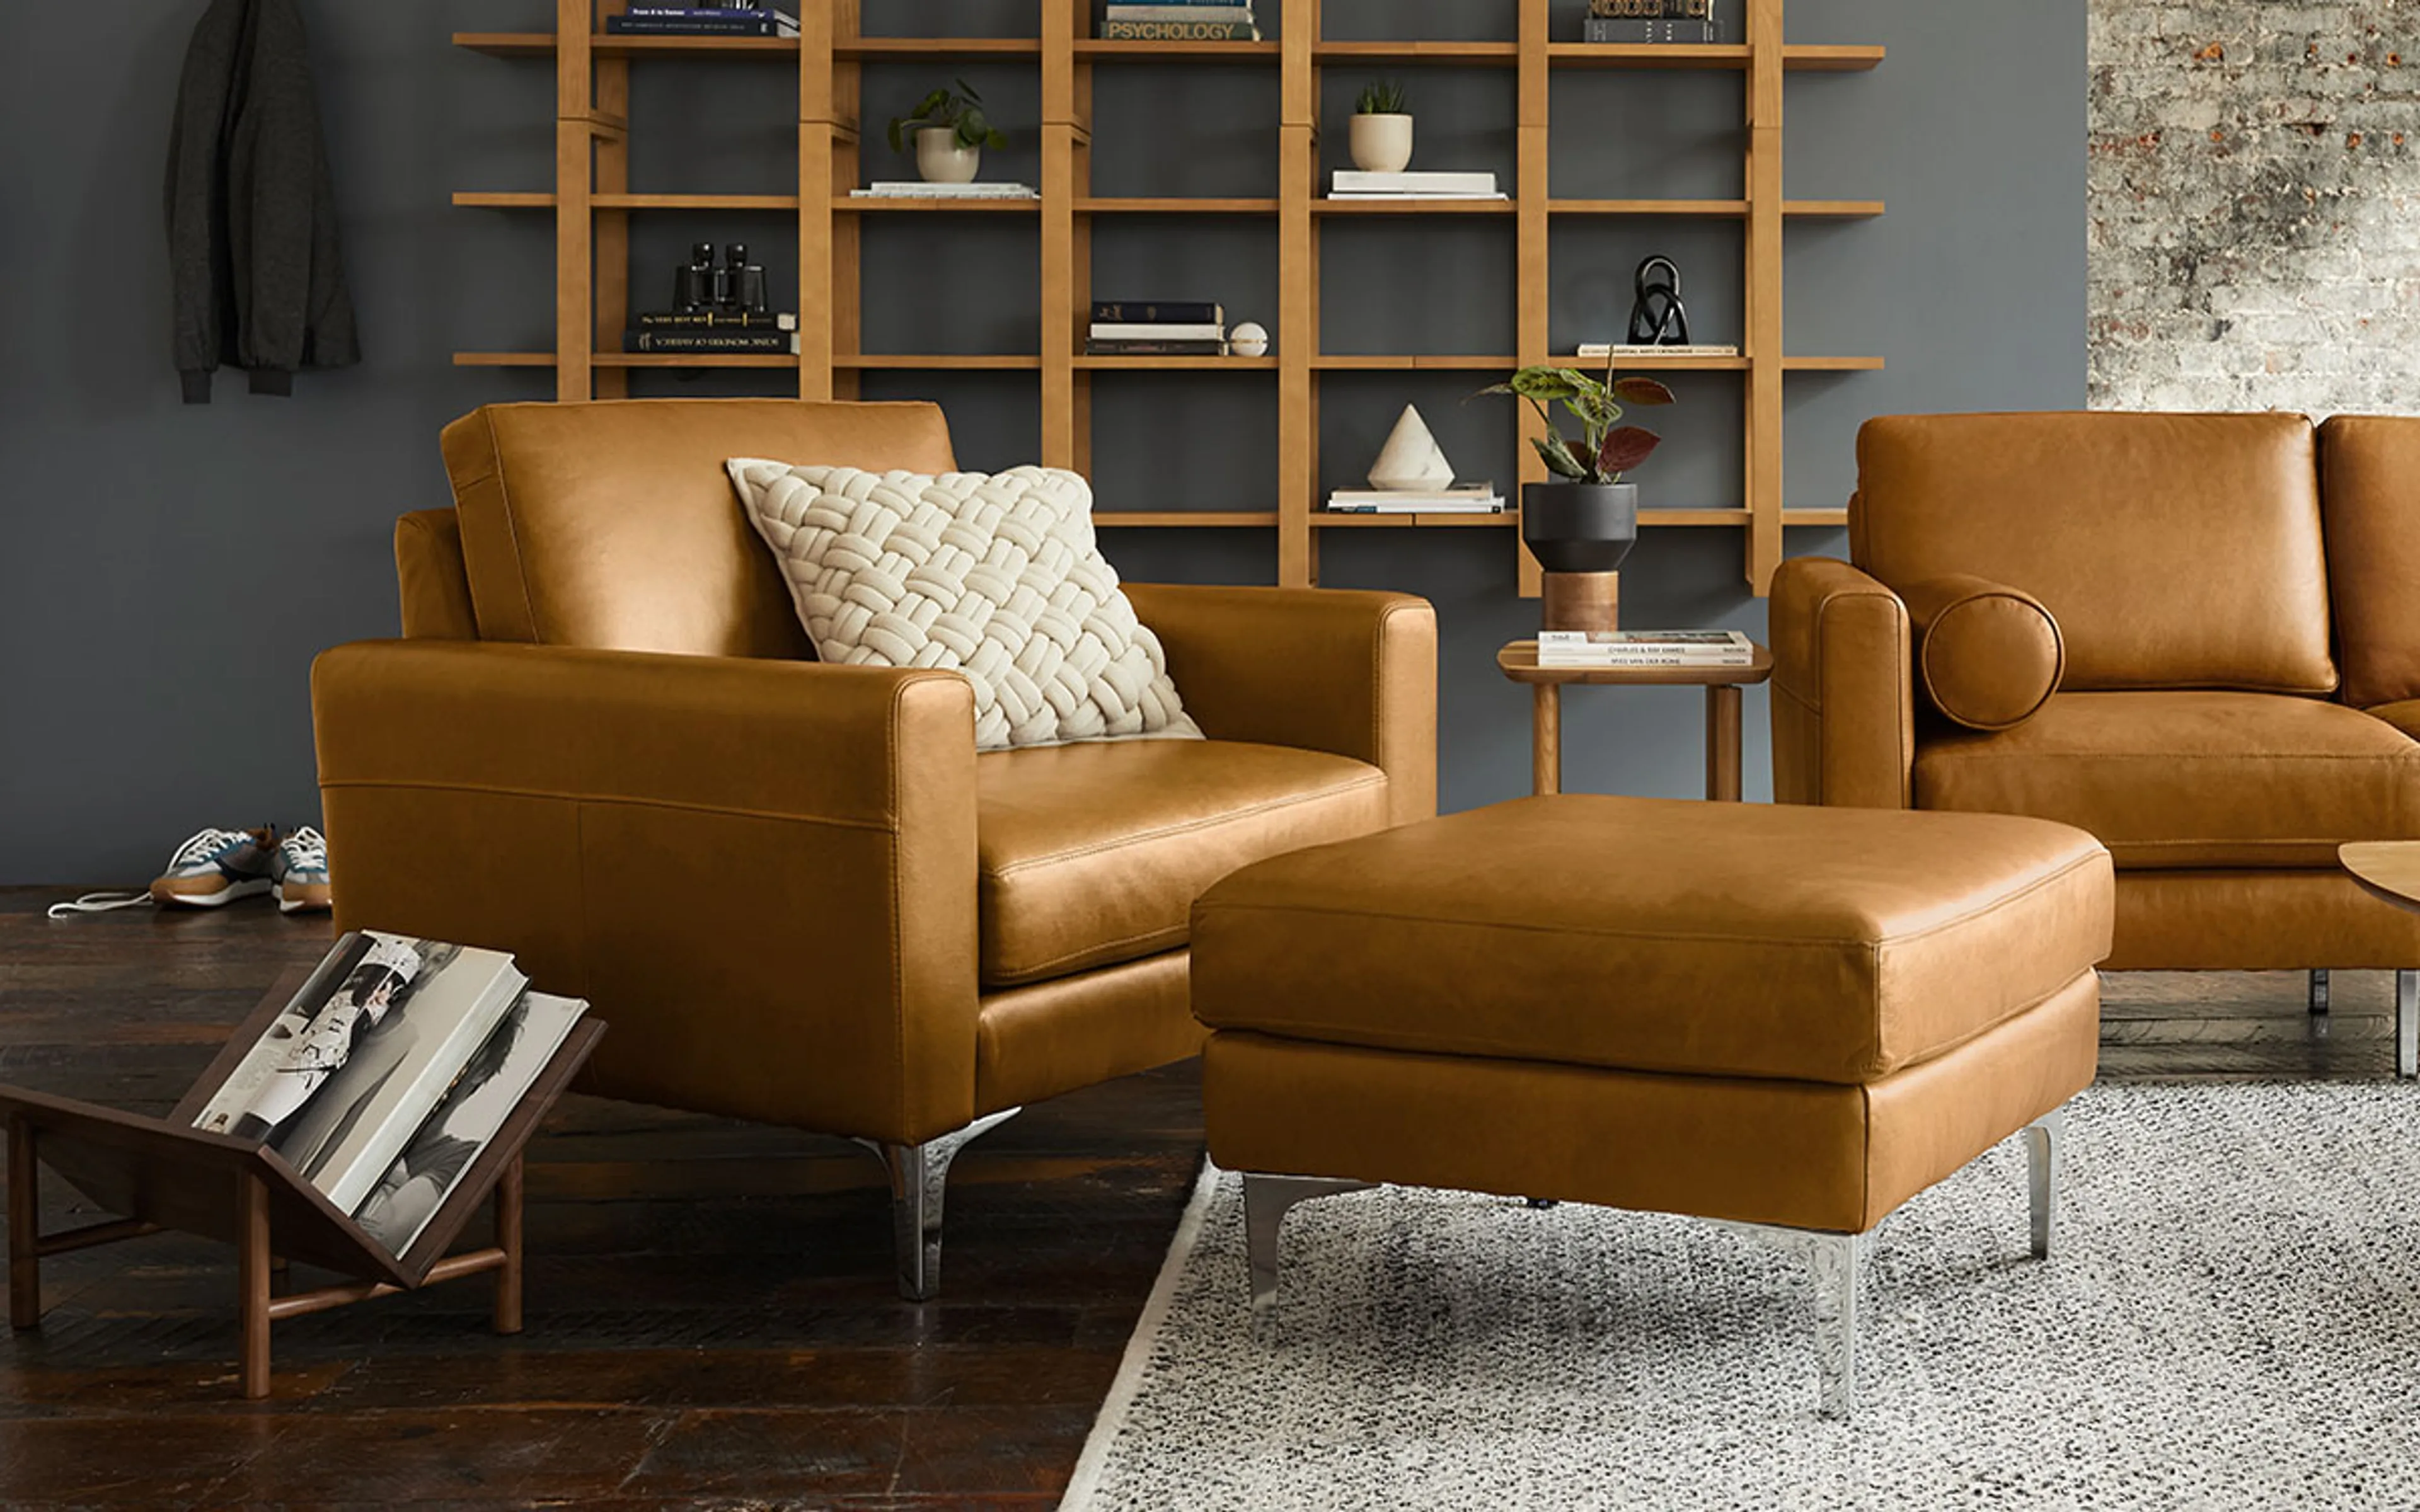 Original Nomad Armchair with Ottoman in Camel Leather